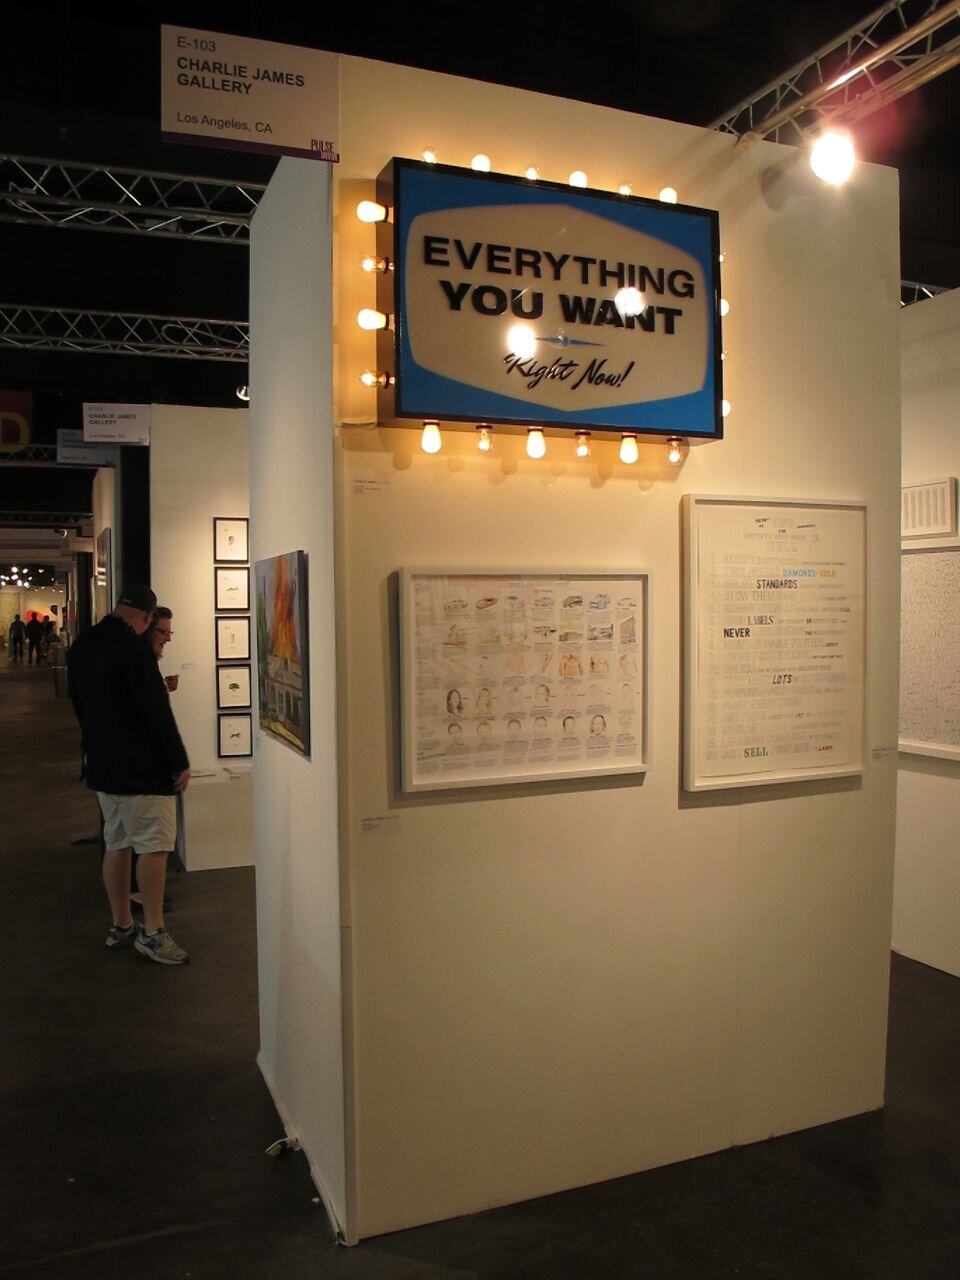  Charlie James Gallery at Pulse Miami, 2011 